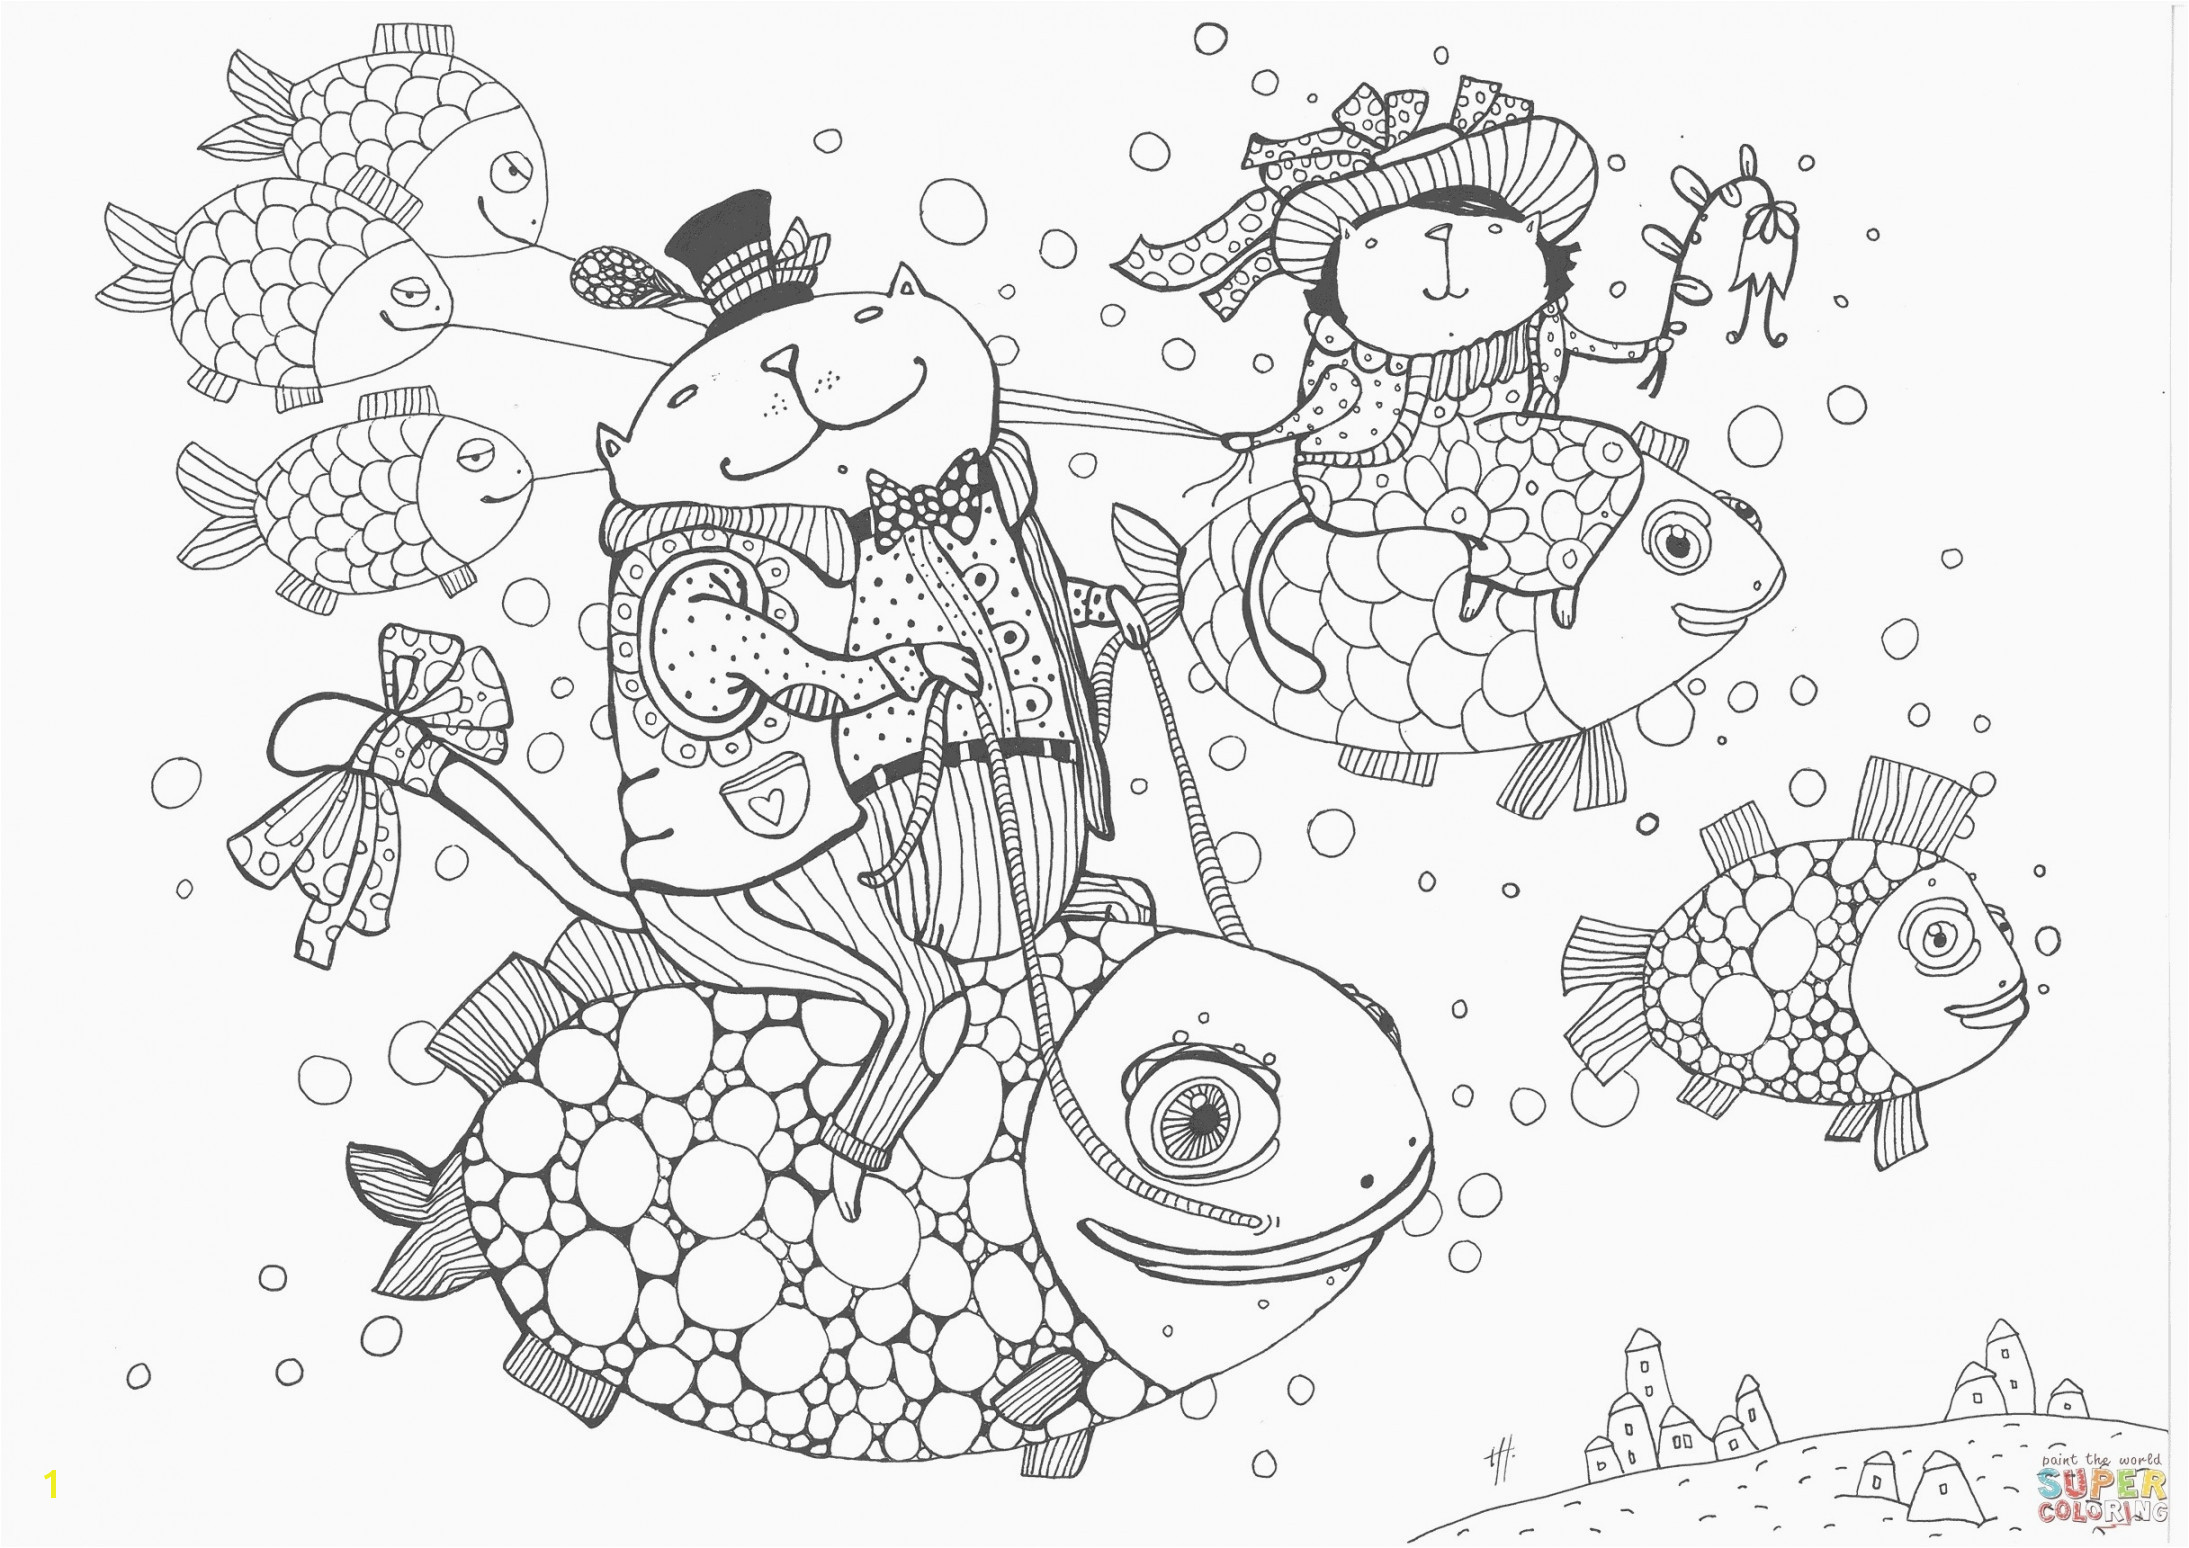 Dorcas Helps Others Coloring Page 20 Best Collections Dorcas Coloring Page Kido Coloring